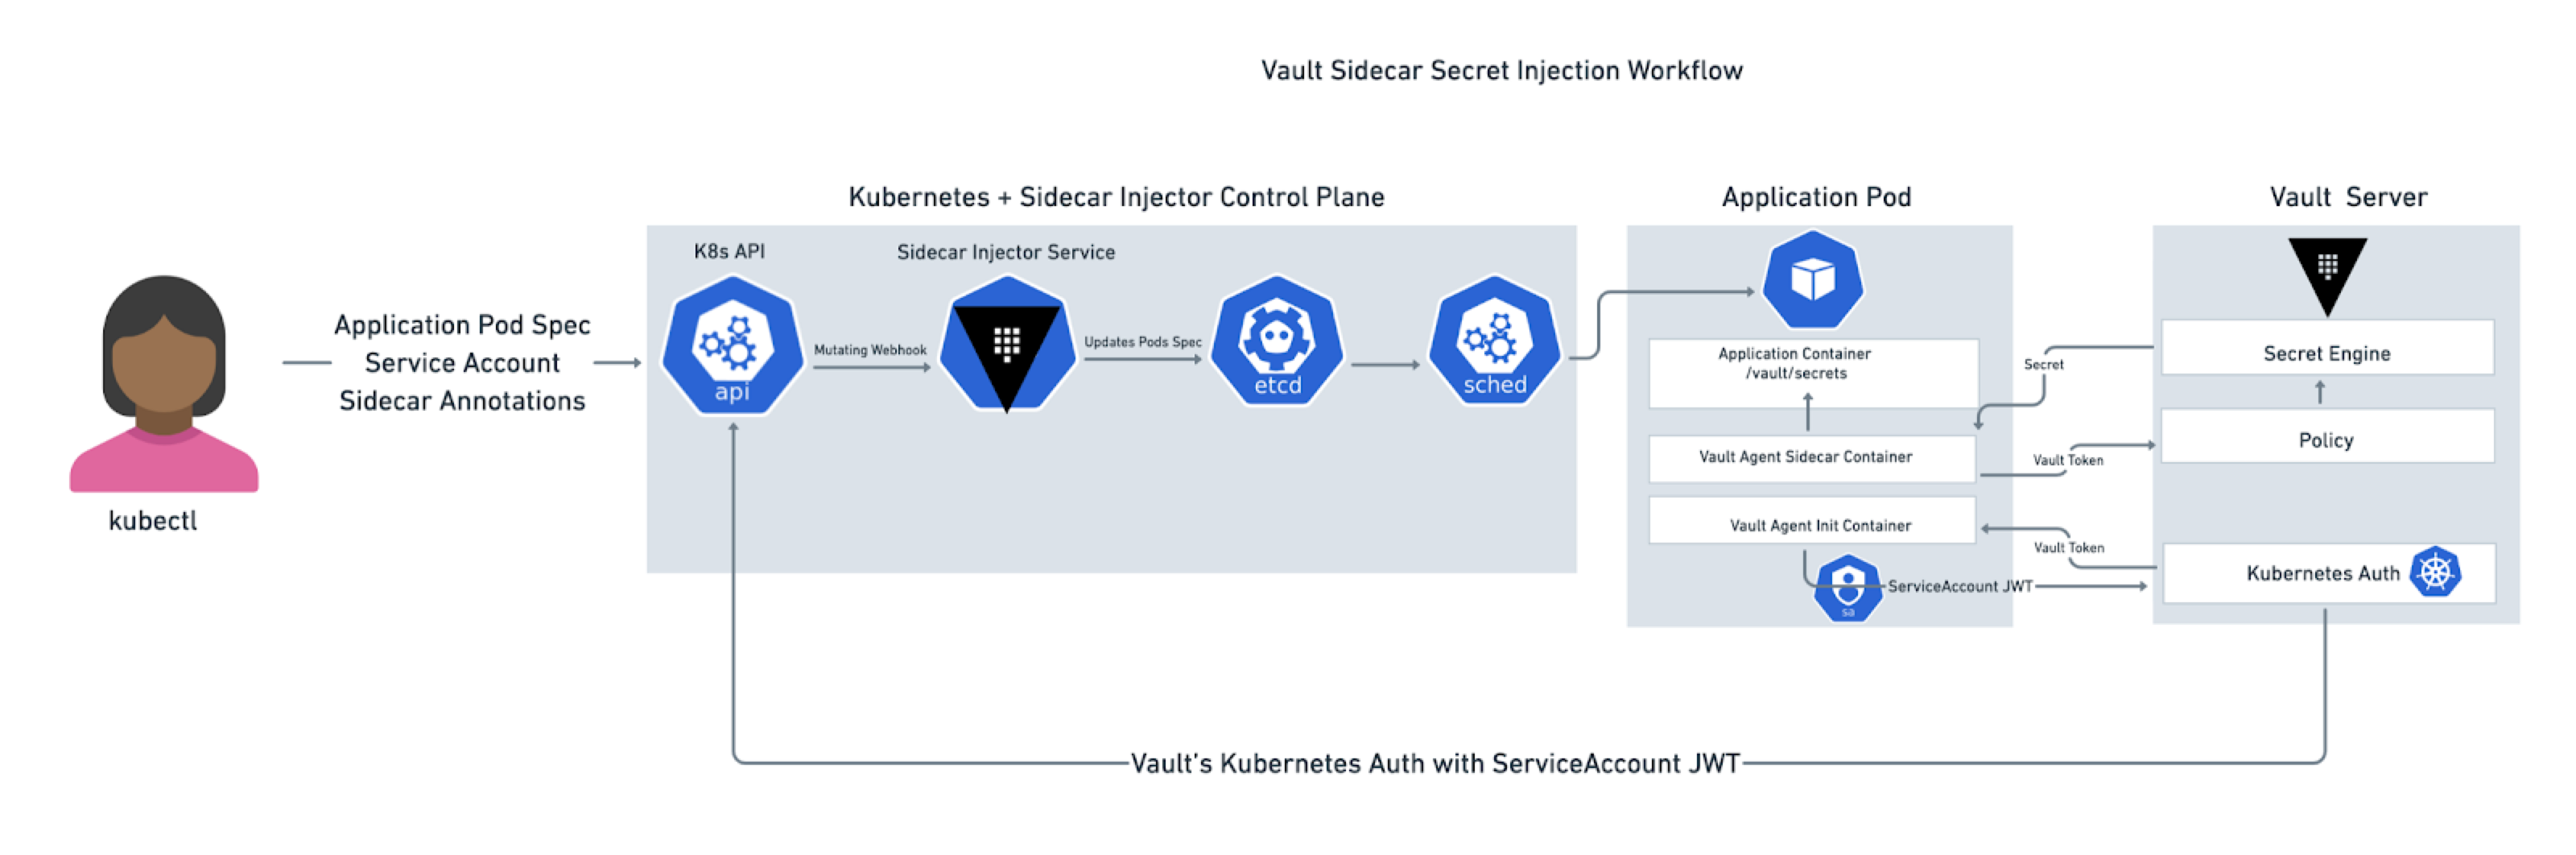 Vault Sidecar Injection Workflow